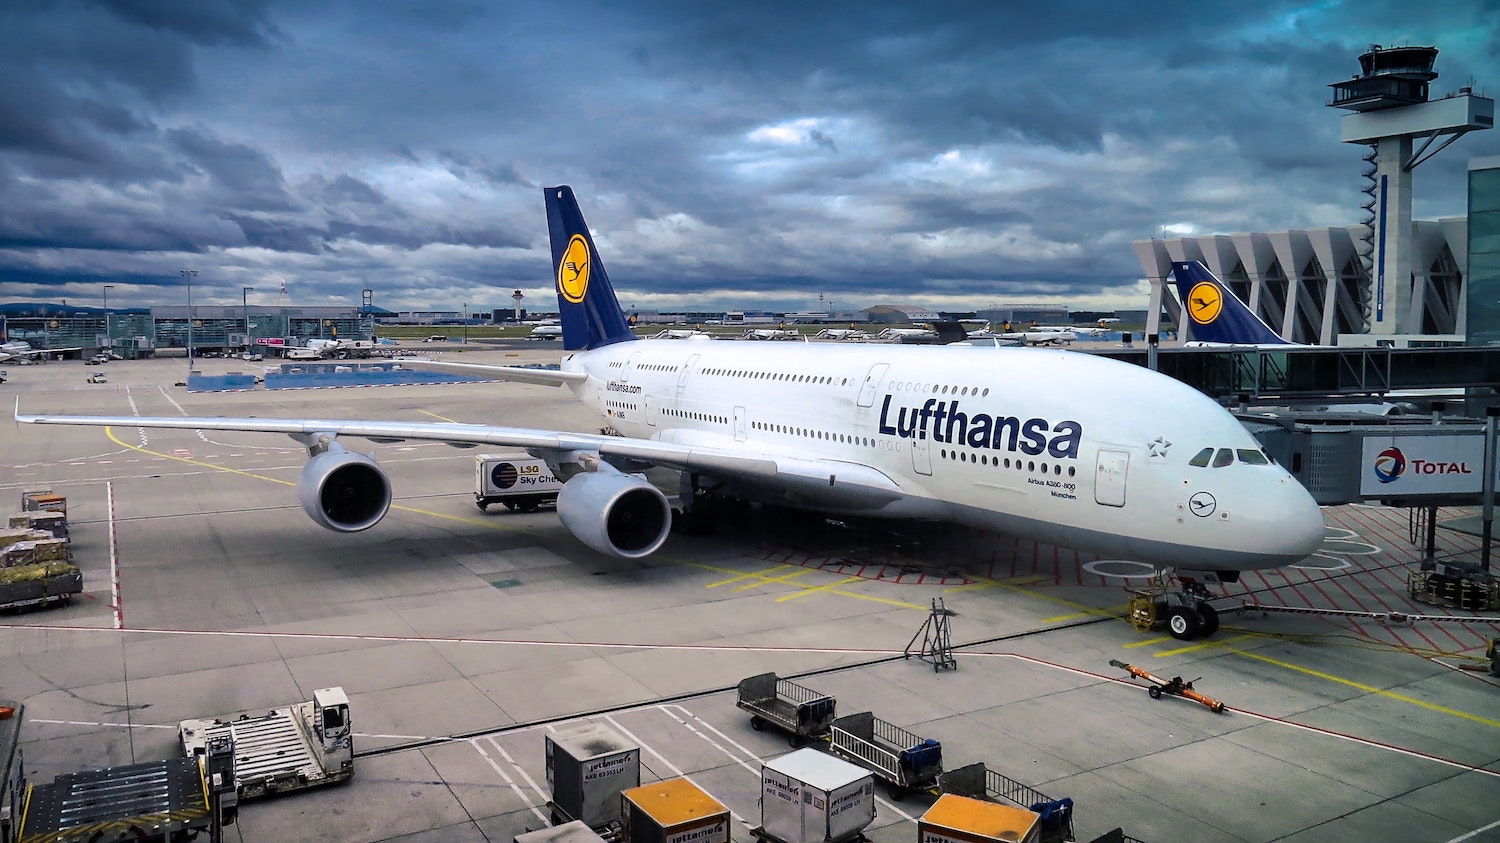 Lufthansa Will Consider Bringing Back Airbus A380s